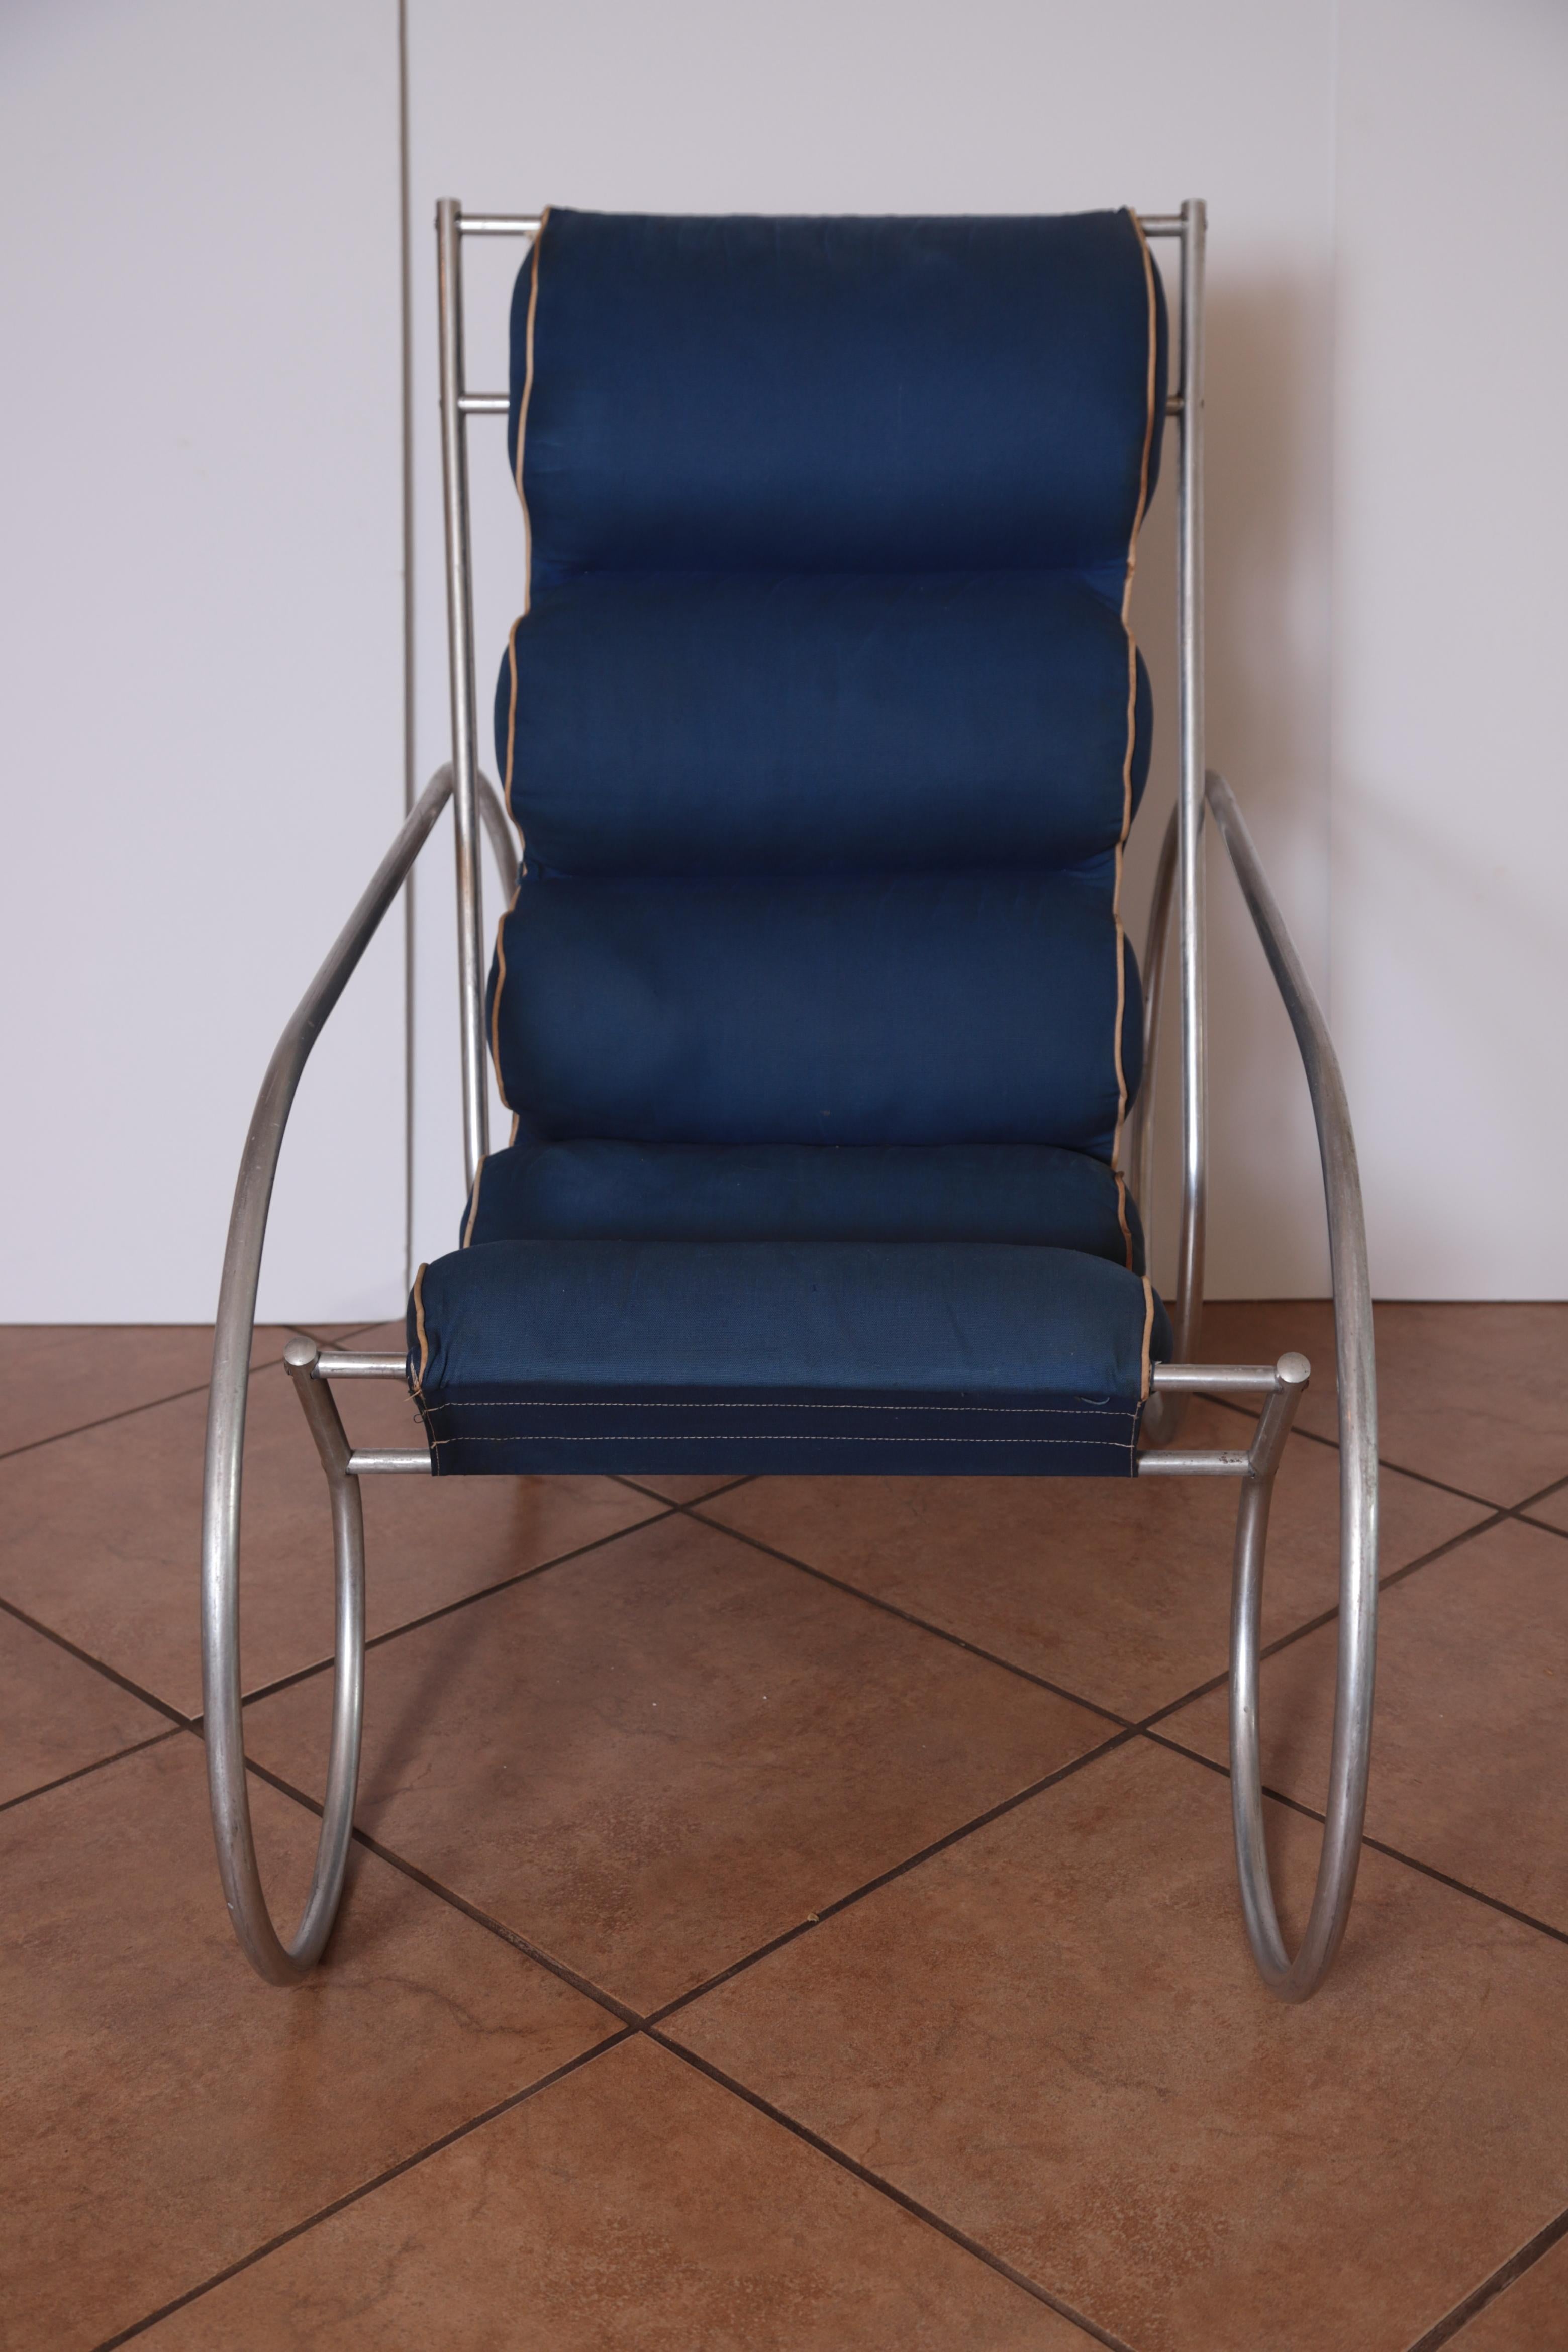 Art Deco Machine Age streamline indoor / outdoor tubular aluminum lounge chair

A uncommon example, in the manner of Richard Neutra or Warren McArthur.
Appears to be original (or very vintage) fabric.

A great vintage original streamline